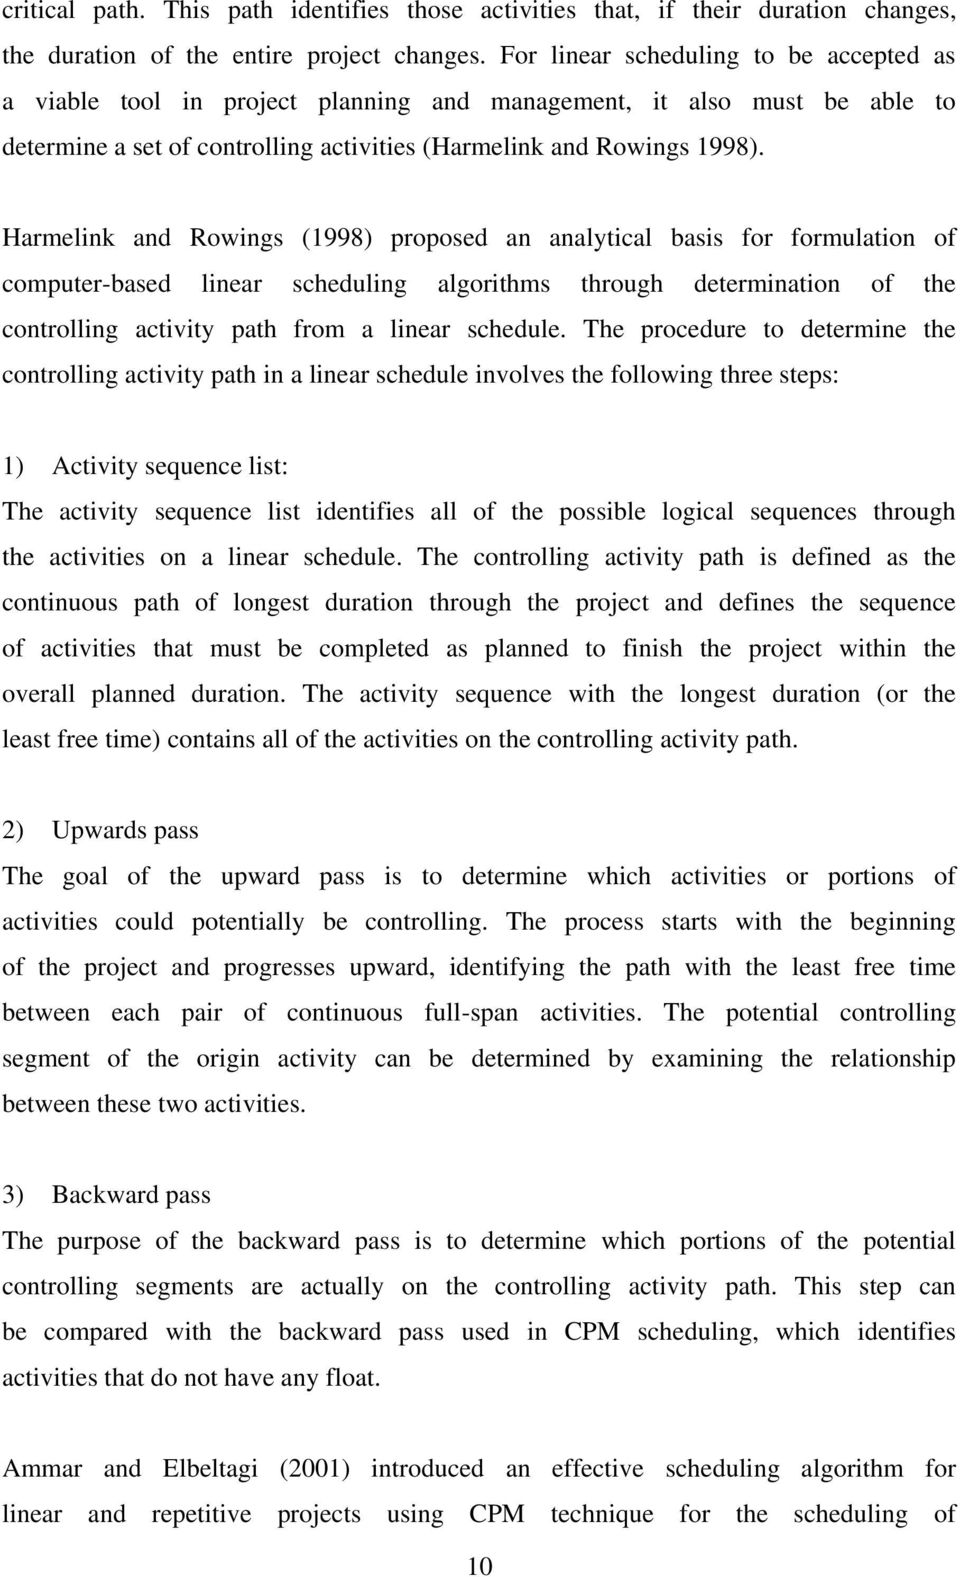 Harmelink and Rowings (1998) proposed an analytical basis for formulation of computer-based linear scheduling algorithms through determination of the controlling activity path from a linear schedule.